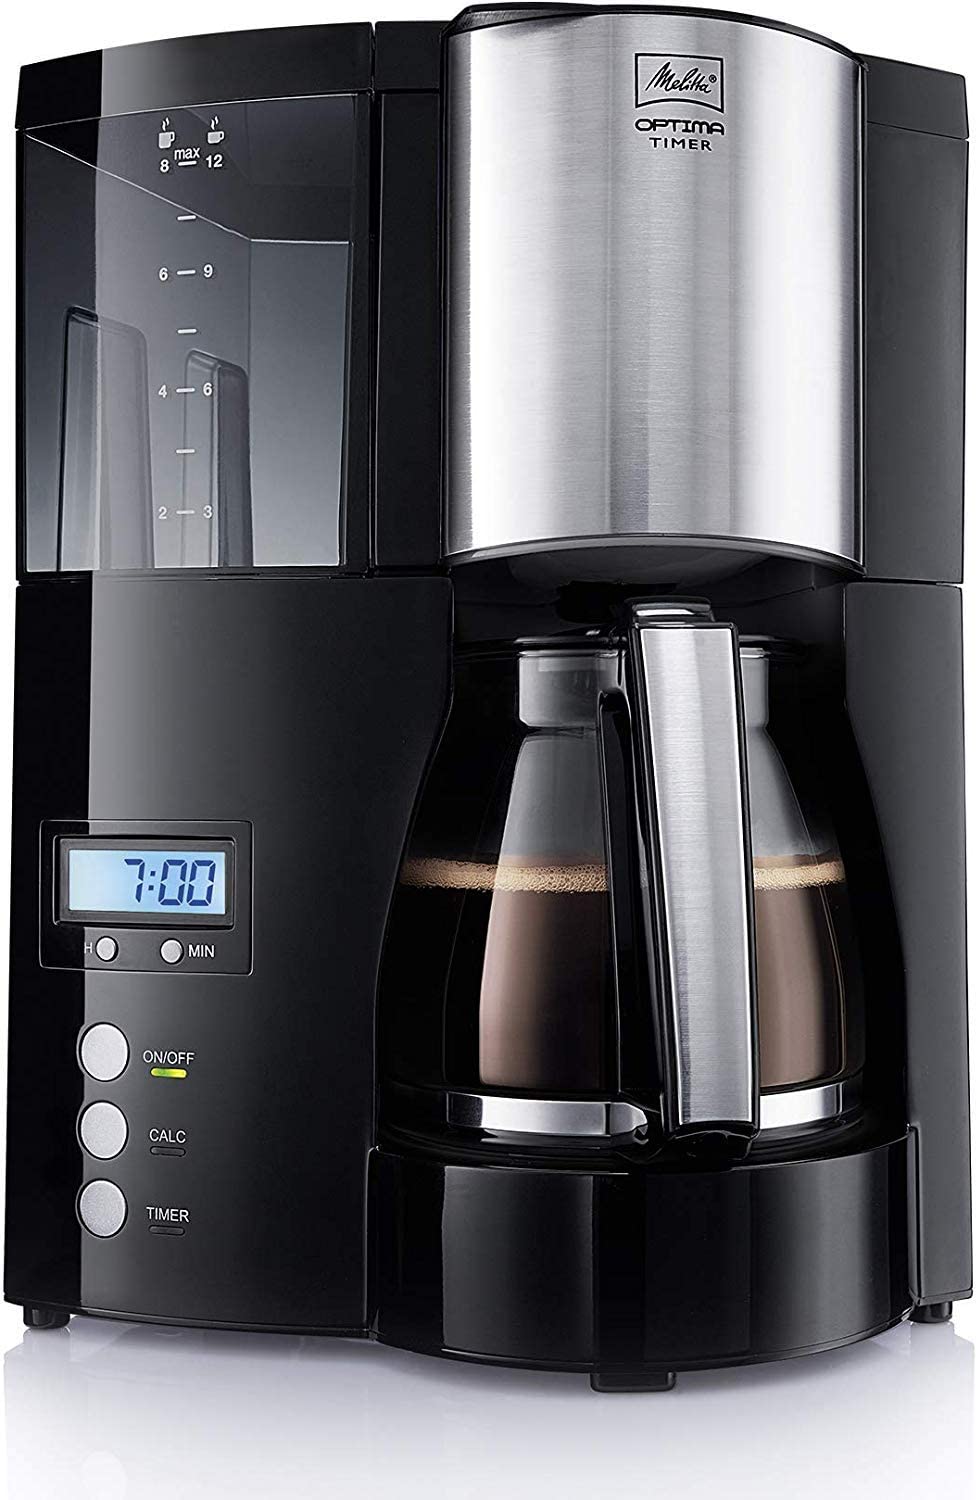 Melitta Optima Timer 100801 Coffee Filter Machine, Black and Stainless Steel